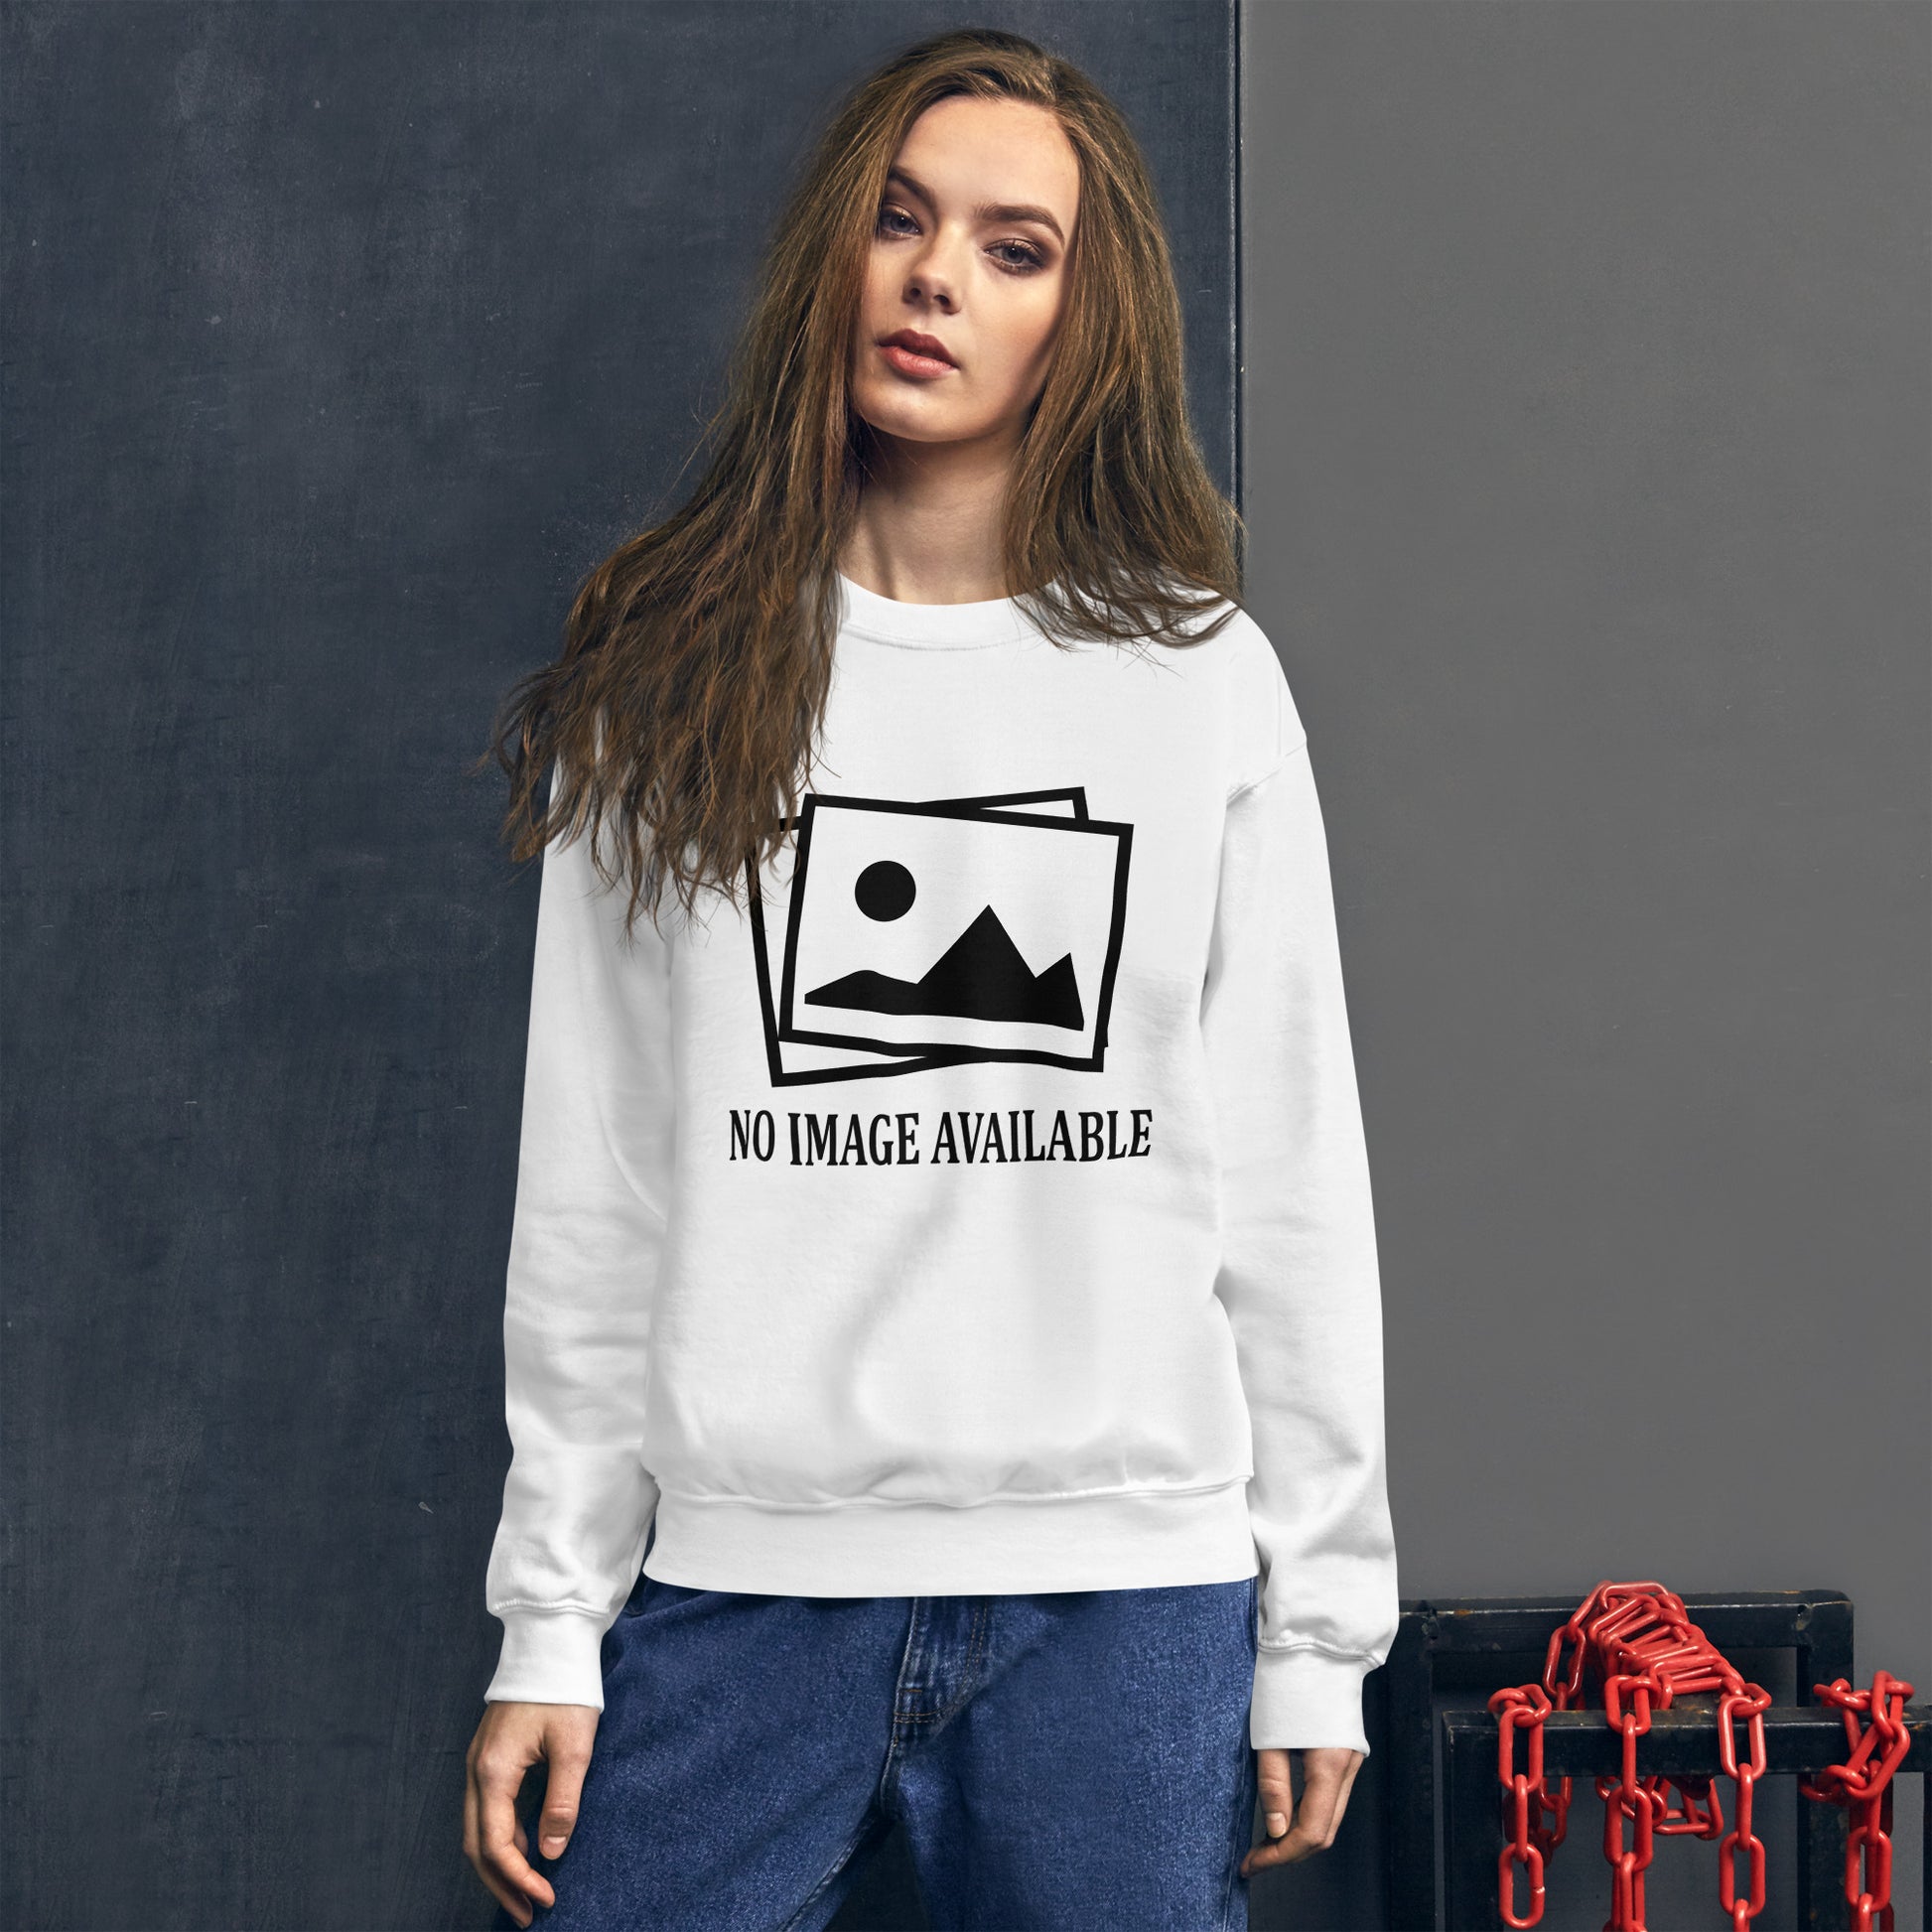 Women with white sweatshirt with image and text "no image available"